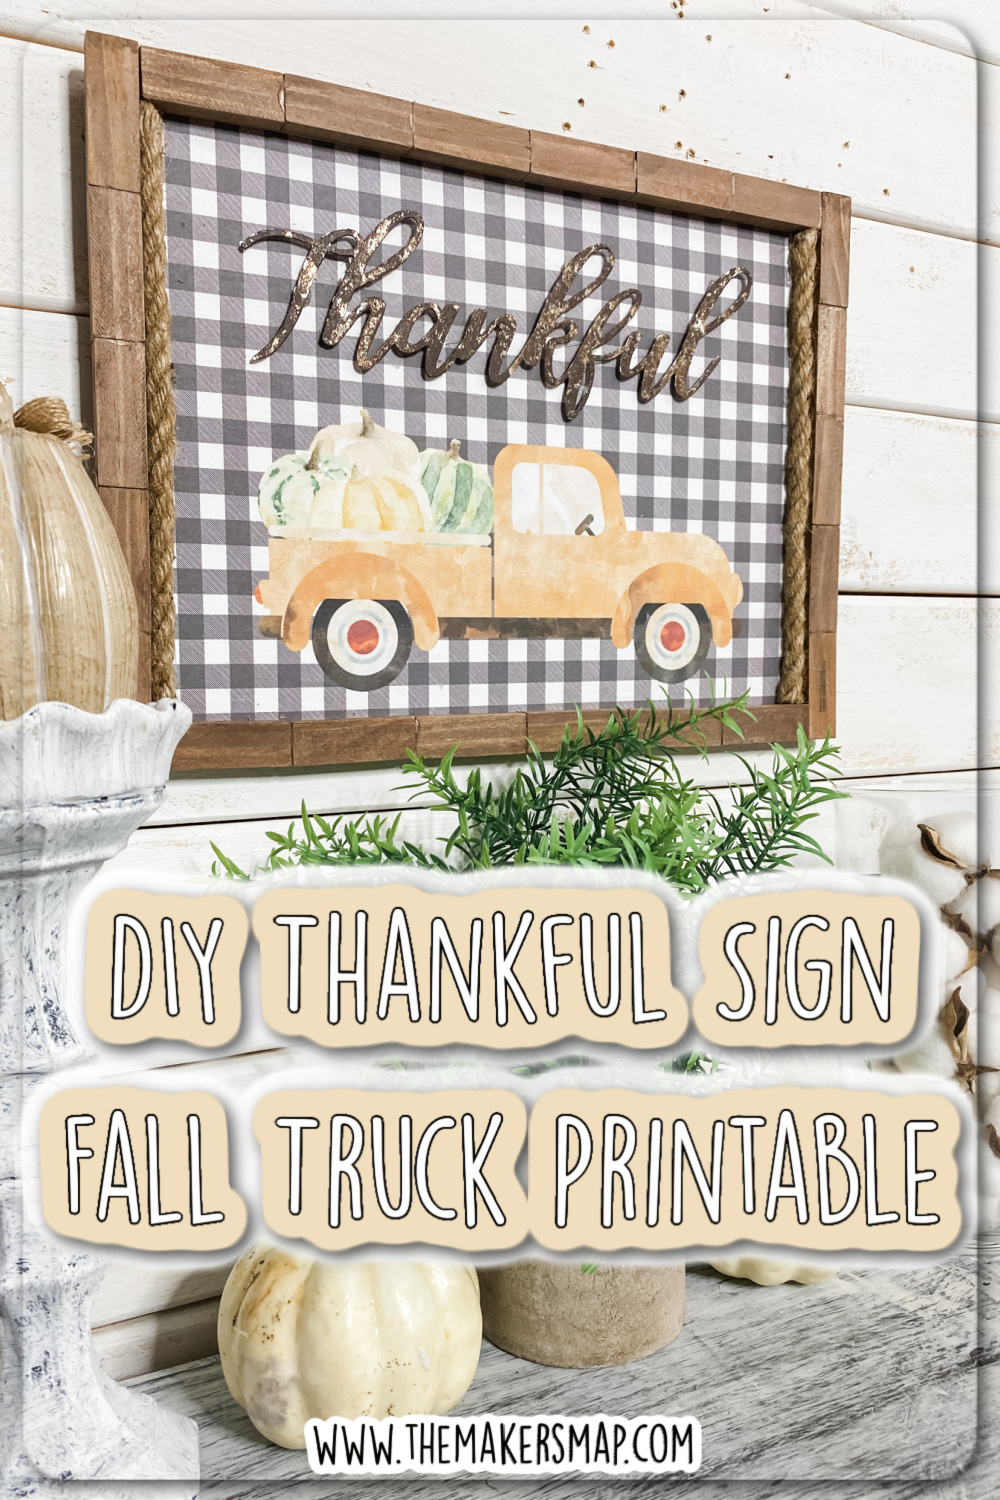 Thankful Sign with Fall Truck Printable